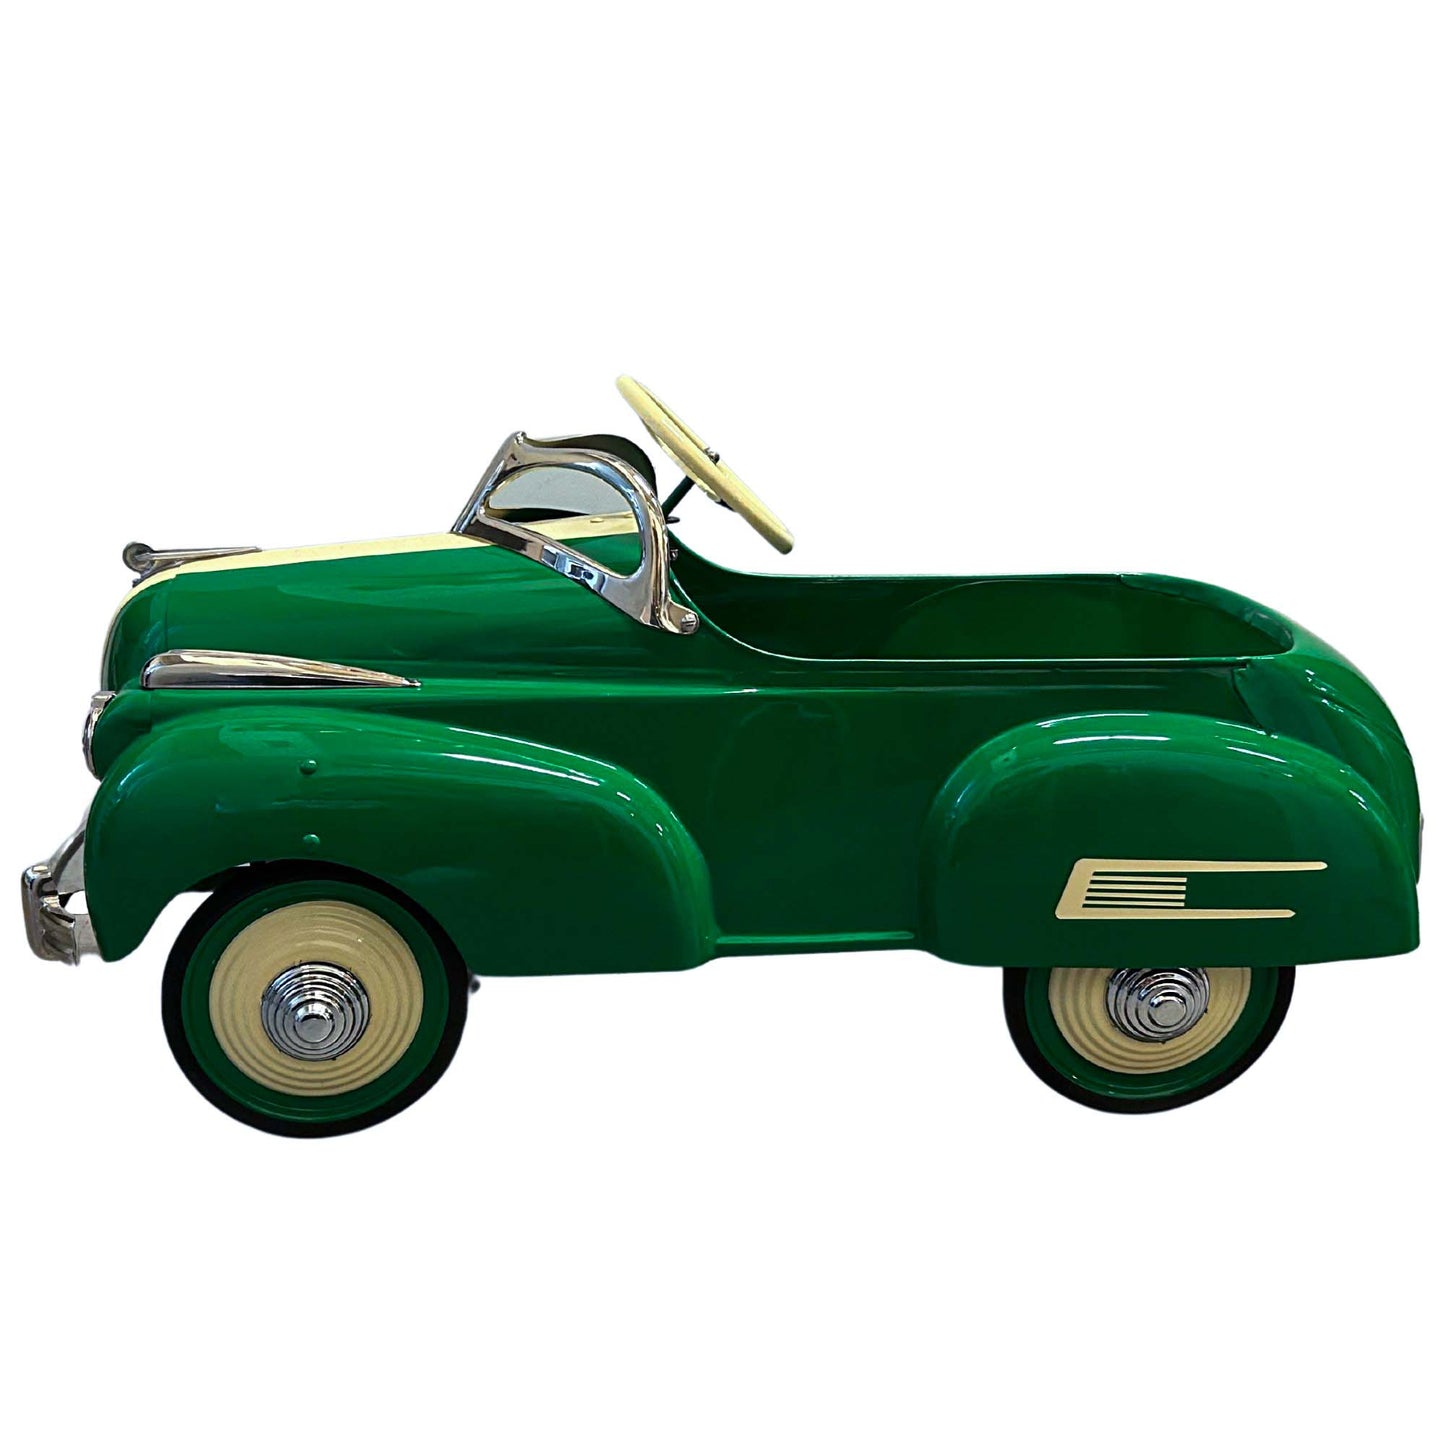 1941 Steelcraft Buick Pedal Car Right View